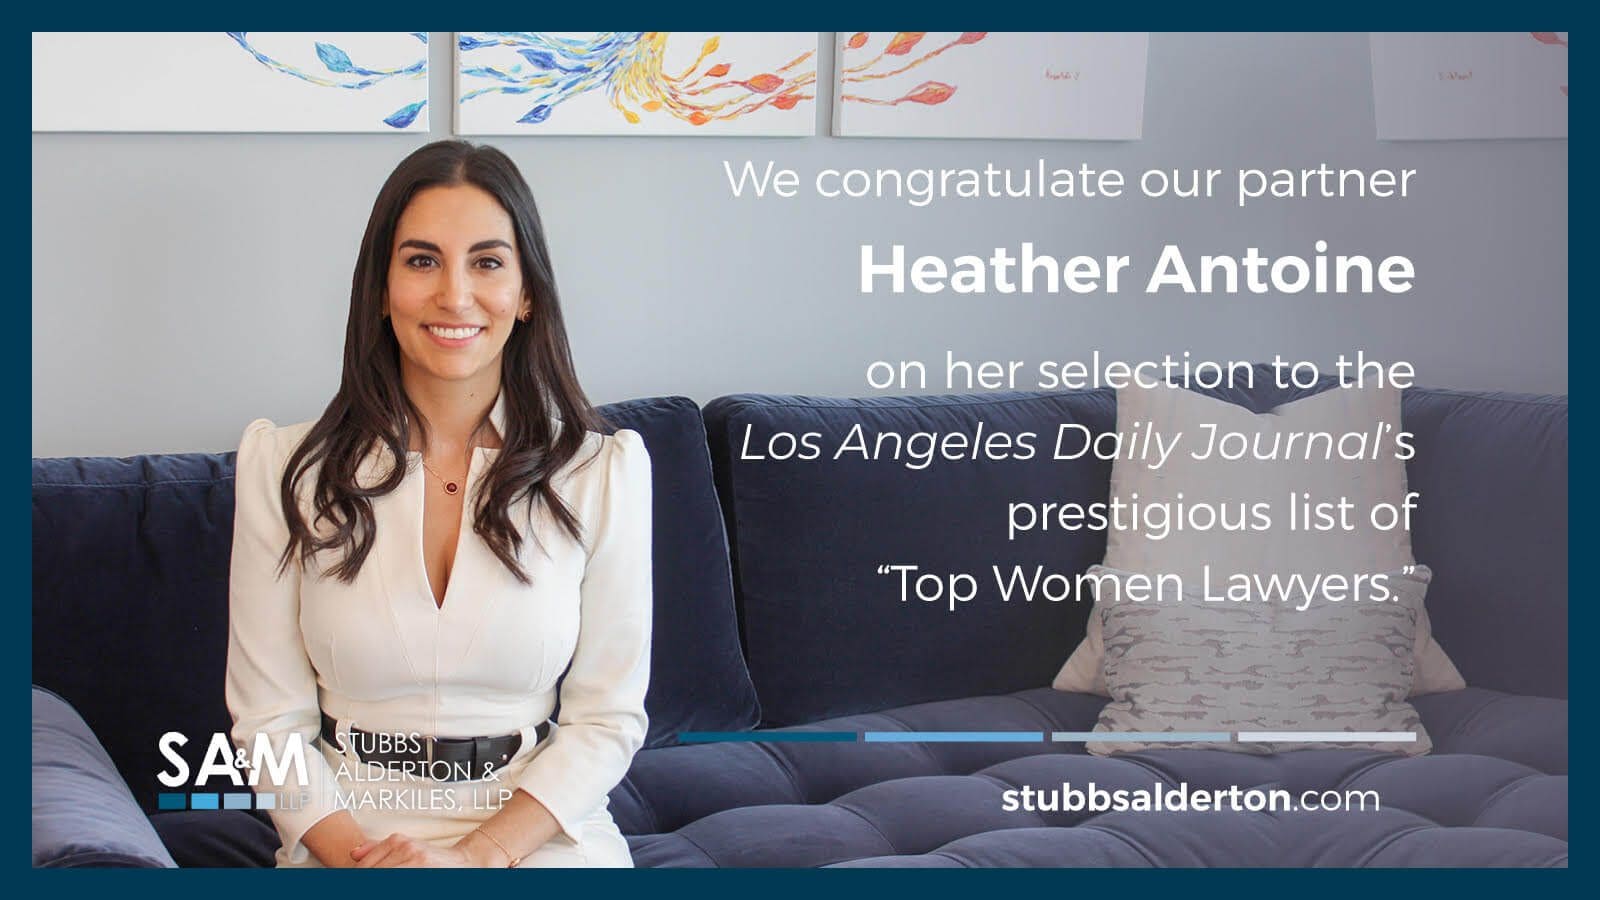 Heather Antoine Named to Los Angeles Daily Journal’s 2022 List of “Top Women Lawyers”